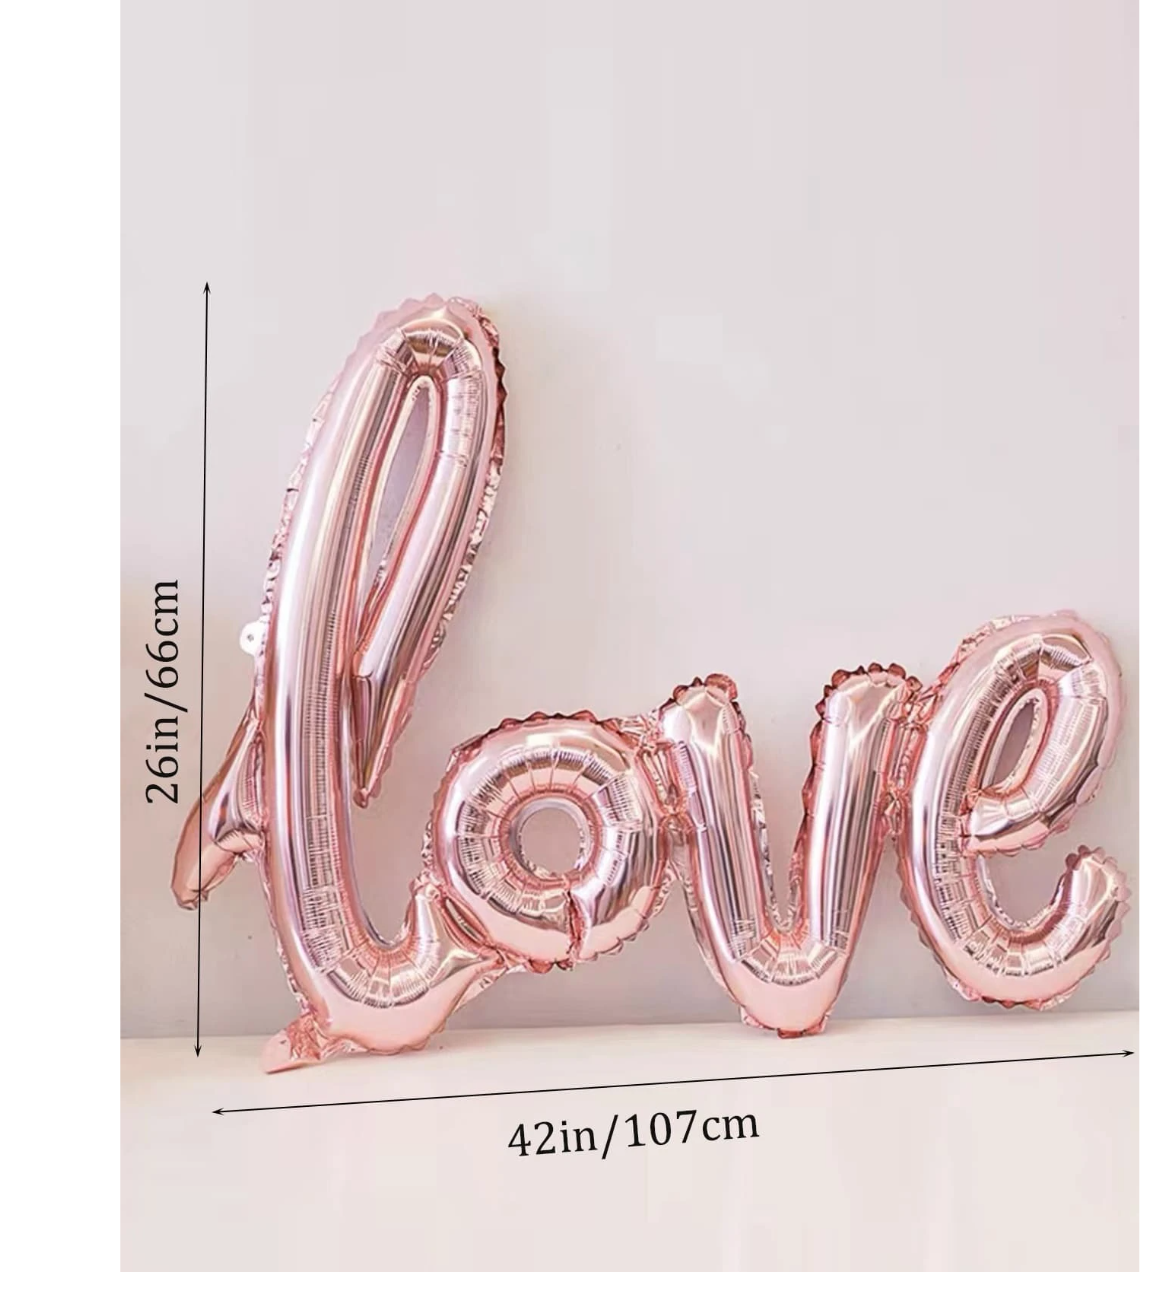 Love in the Air: 1pc 42 Inch Love-Shaped Aluminum Foil Balloon – Elevate Your Wedding, Proposal, and Valentine's Day Decor!